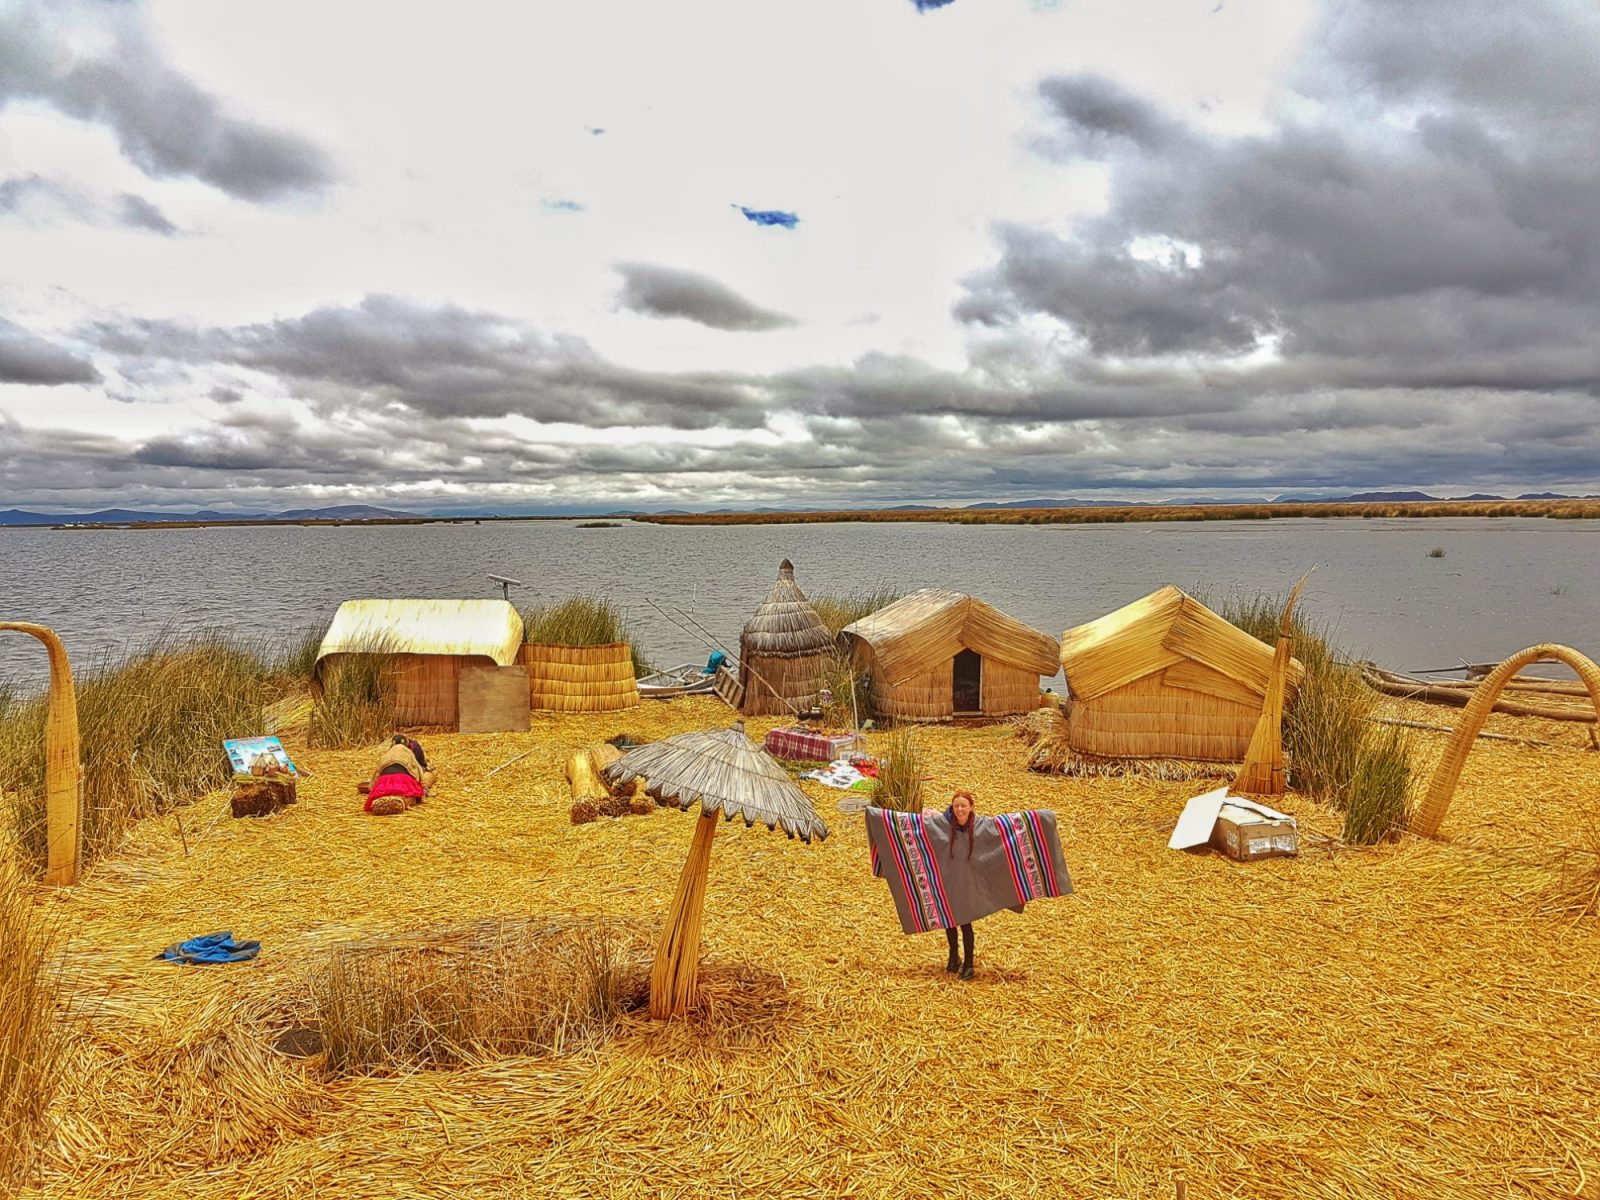 <img src="images/" width="800" height="600" alt="uros titinos - wp image 1574800333 - Peru: Uros Titinos, The Real Floating Reed Islands ">